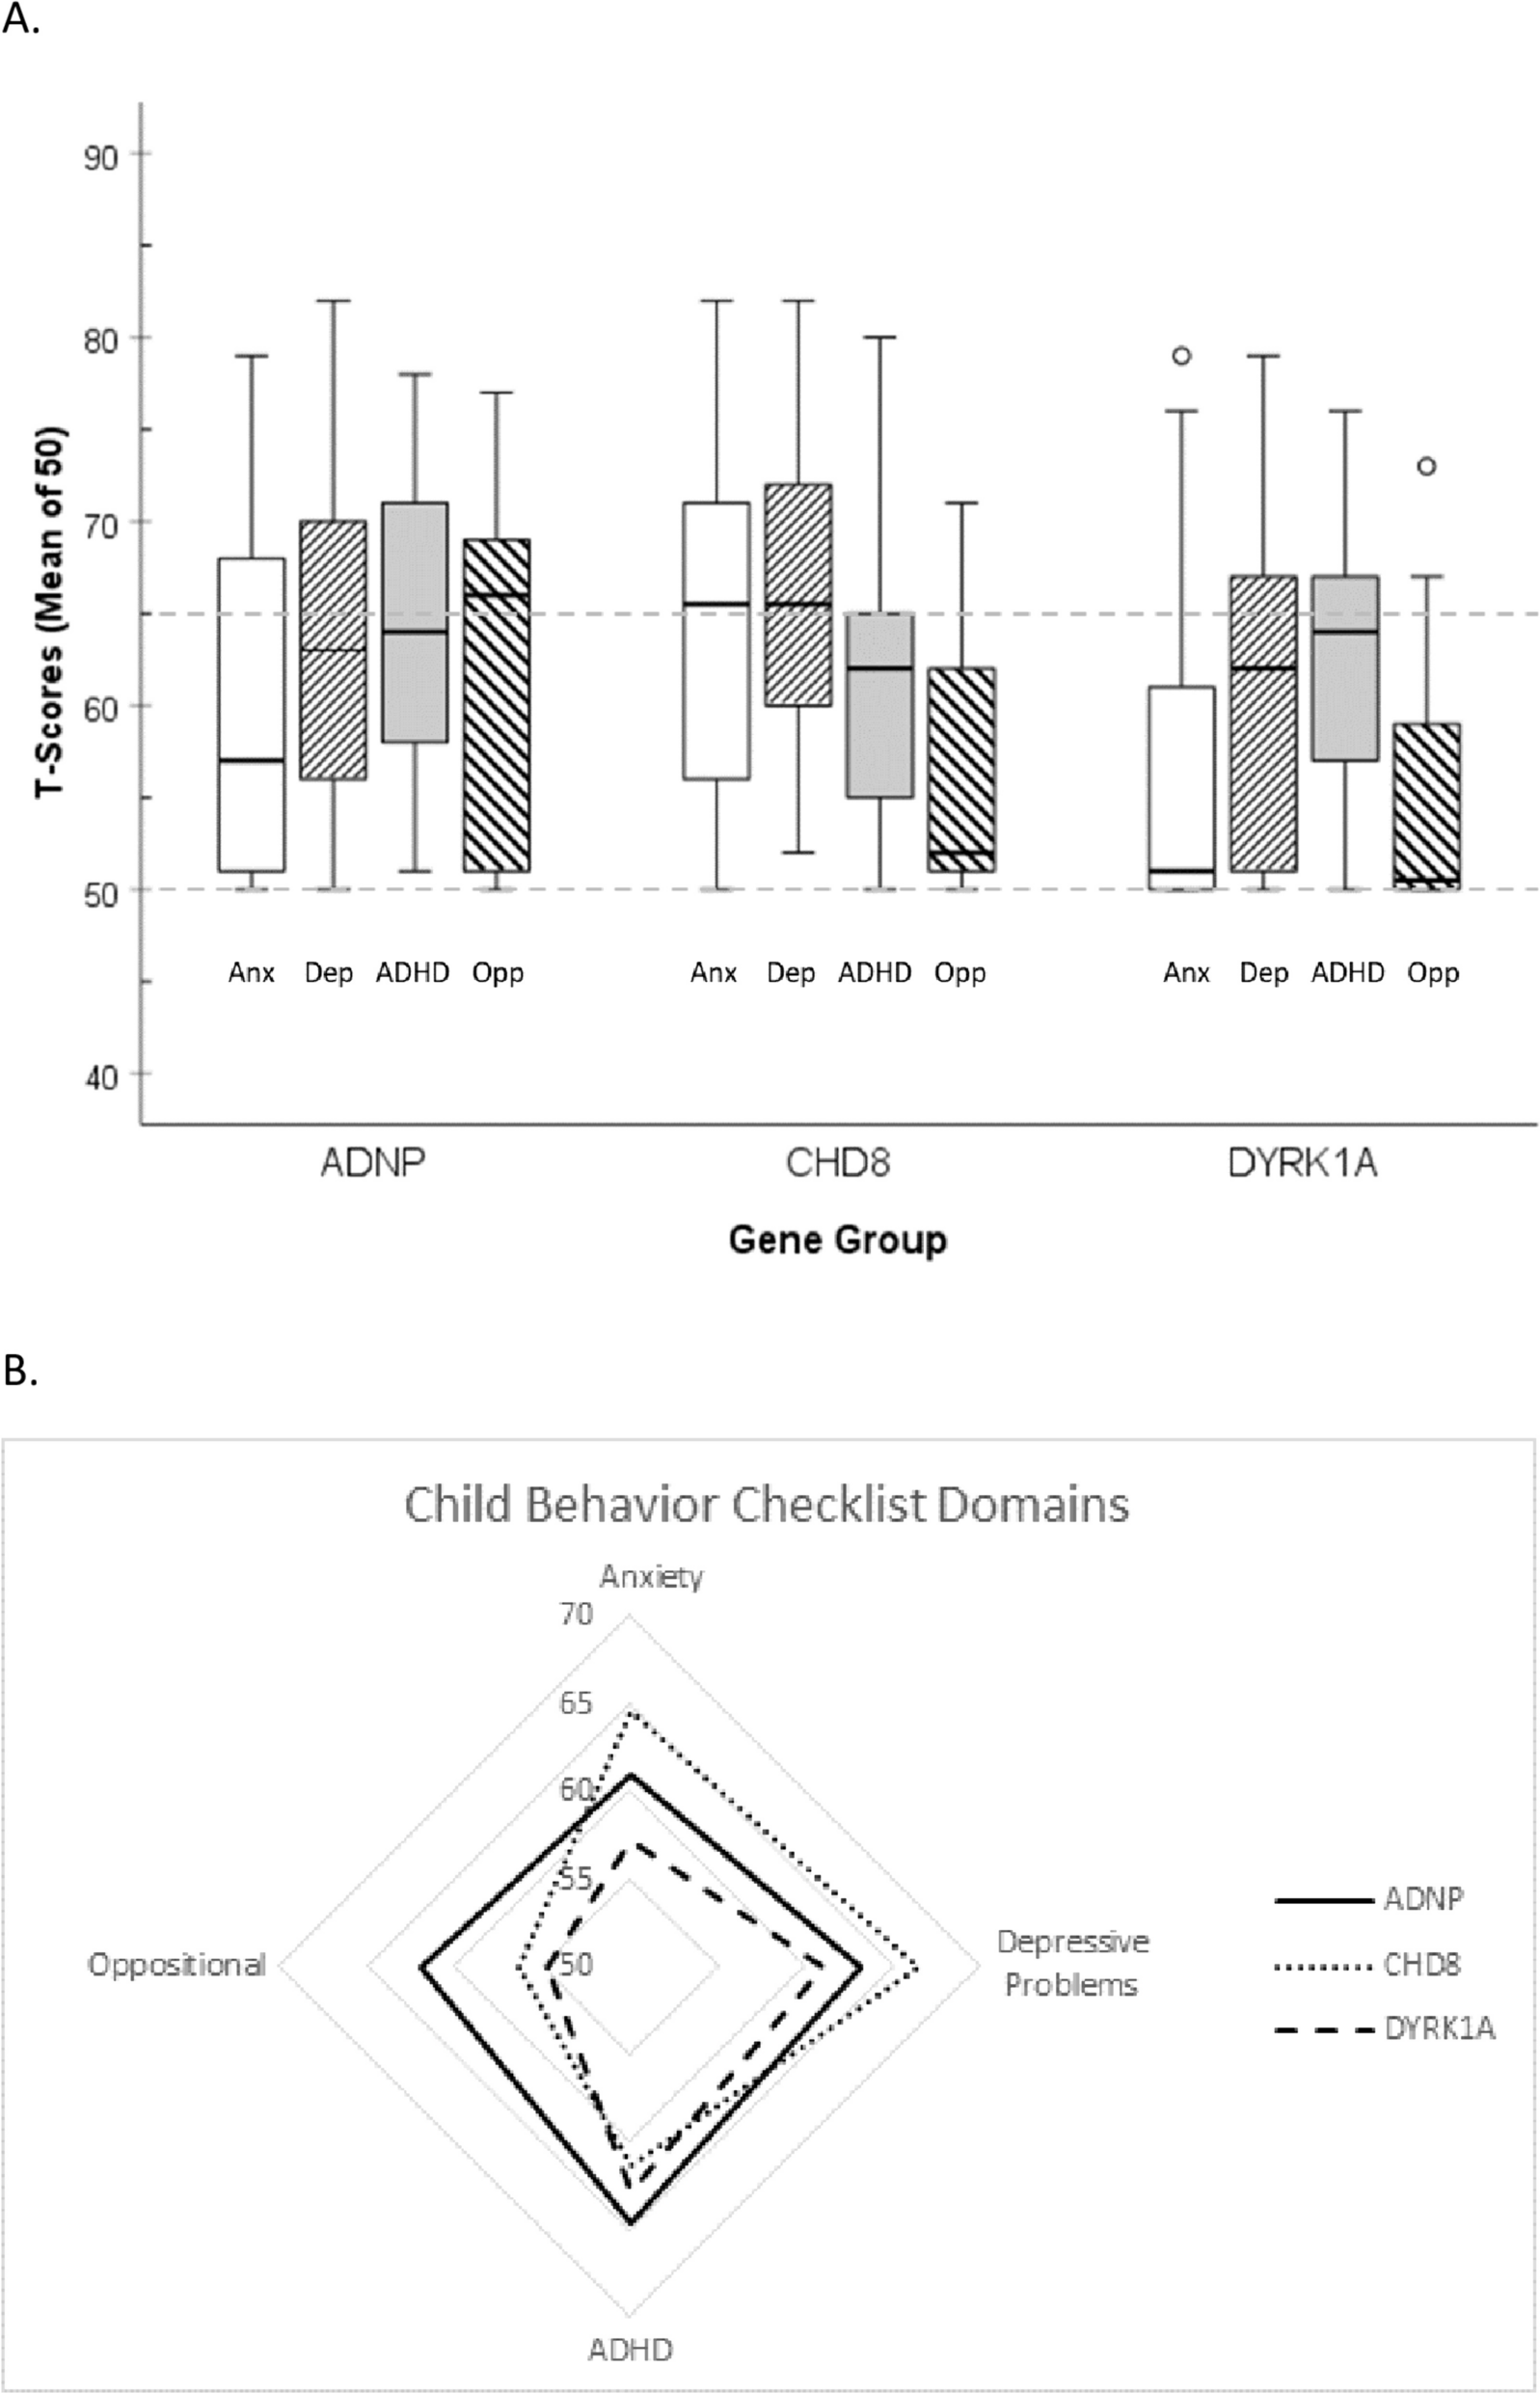 Shared and divergent mental health characteristics of ADNP-, CHD8- and DYRK1A-related neurodevelopmental conditions